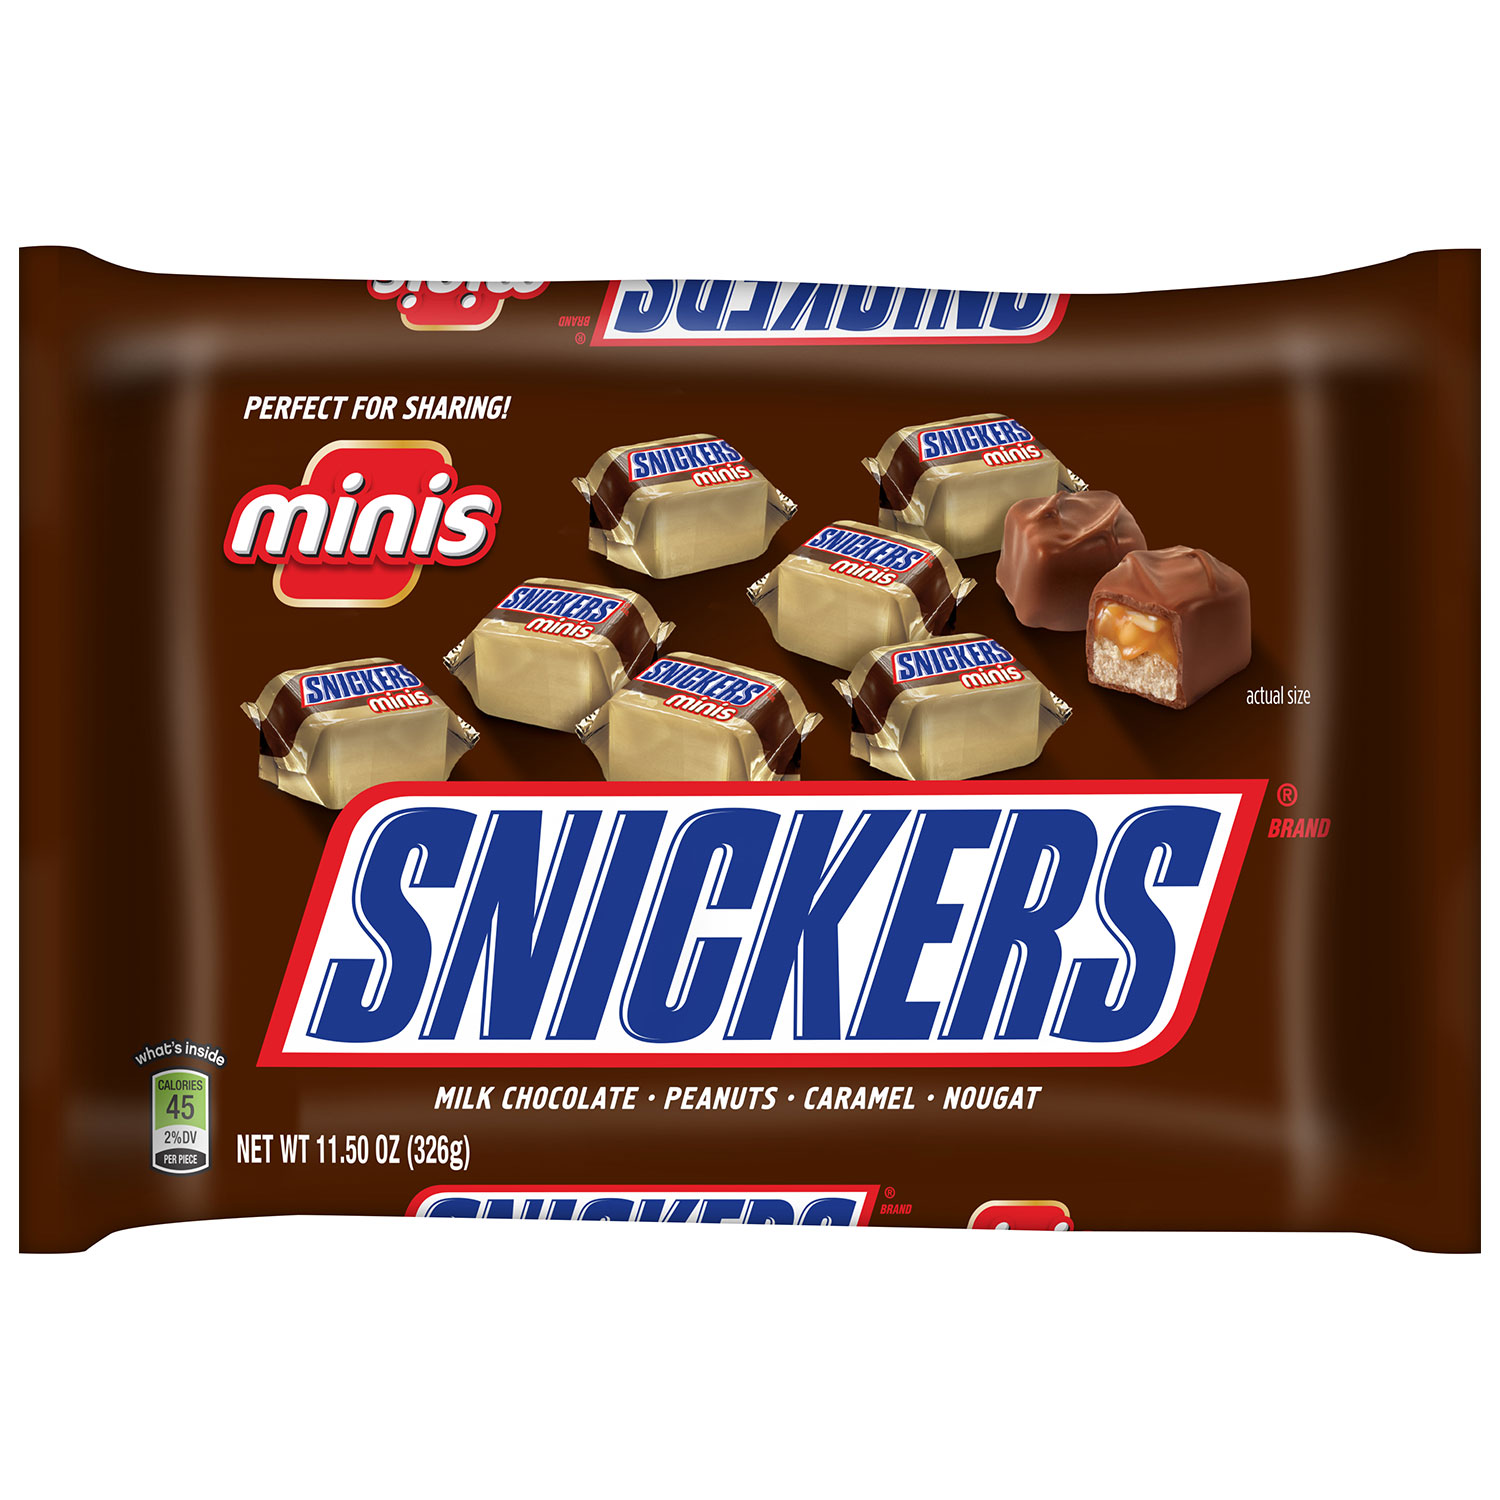 Snickers Original Minis Chocolate Candy Bars, 11.5 Oz. - image 1 of 7